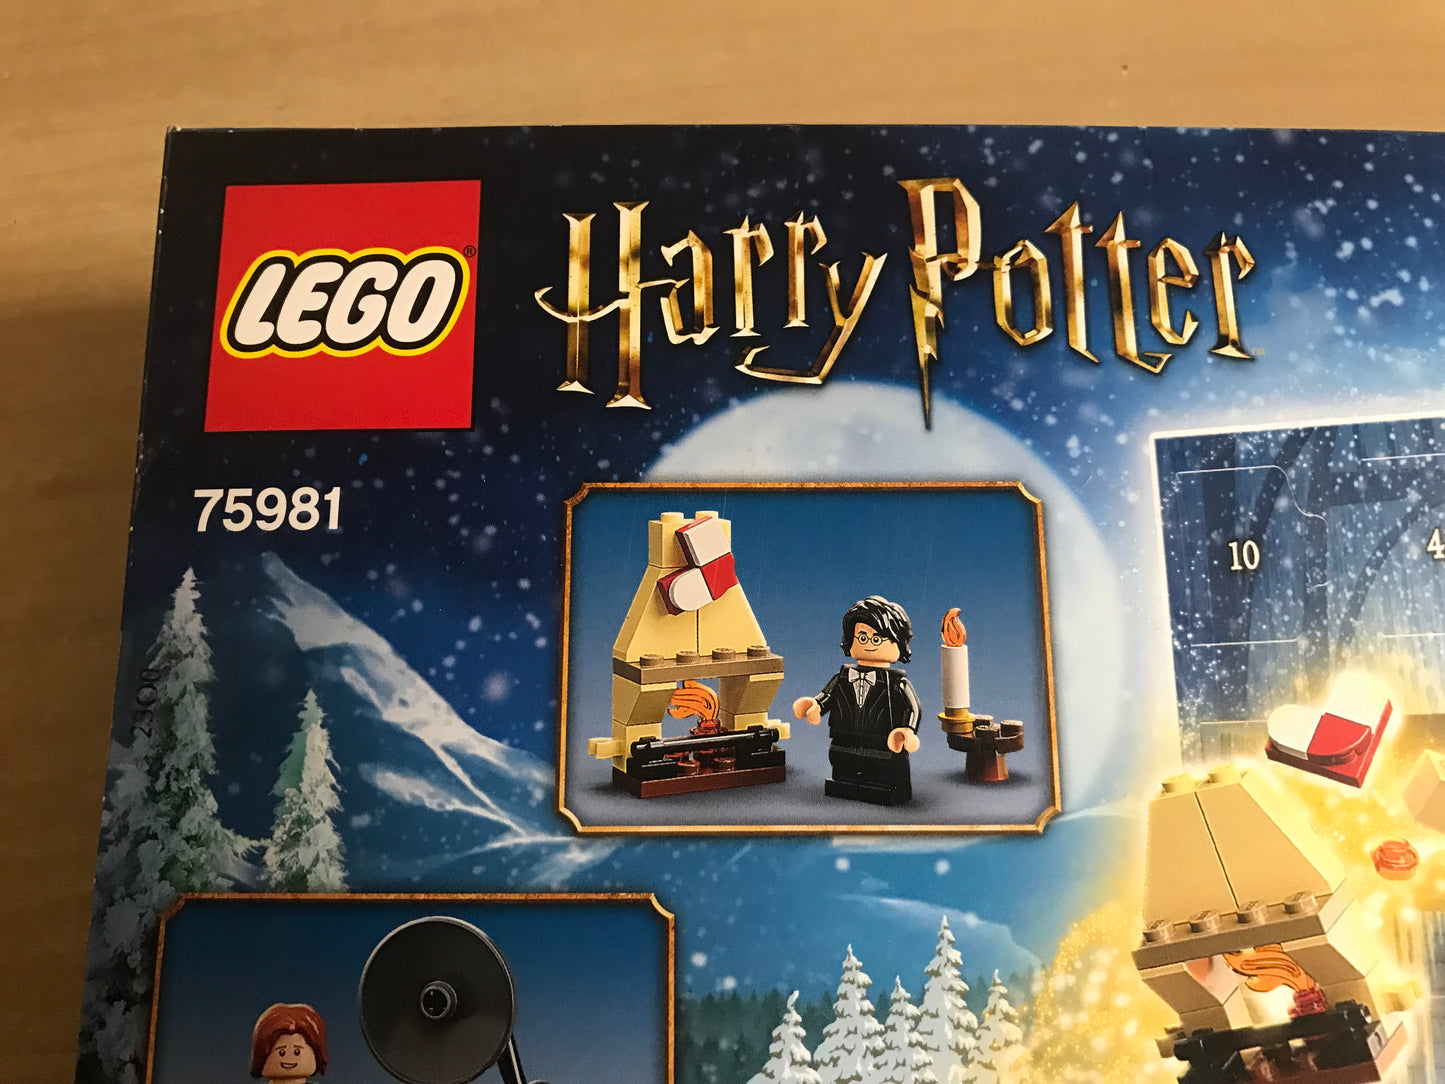 Lego 75981 Harry Potter Advent Calendar 2020 3 Opened All Others Sealed New Complete